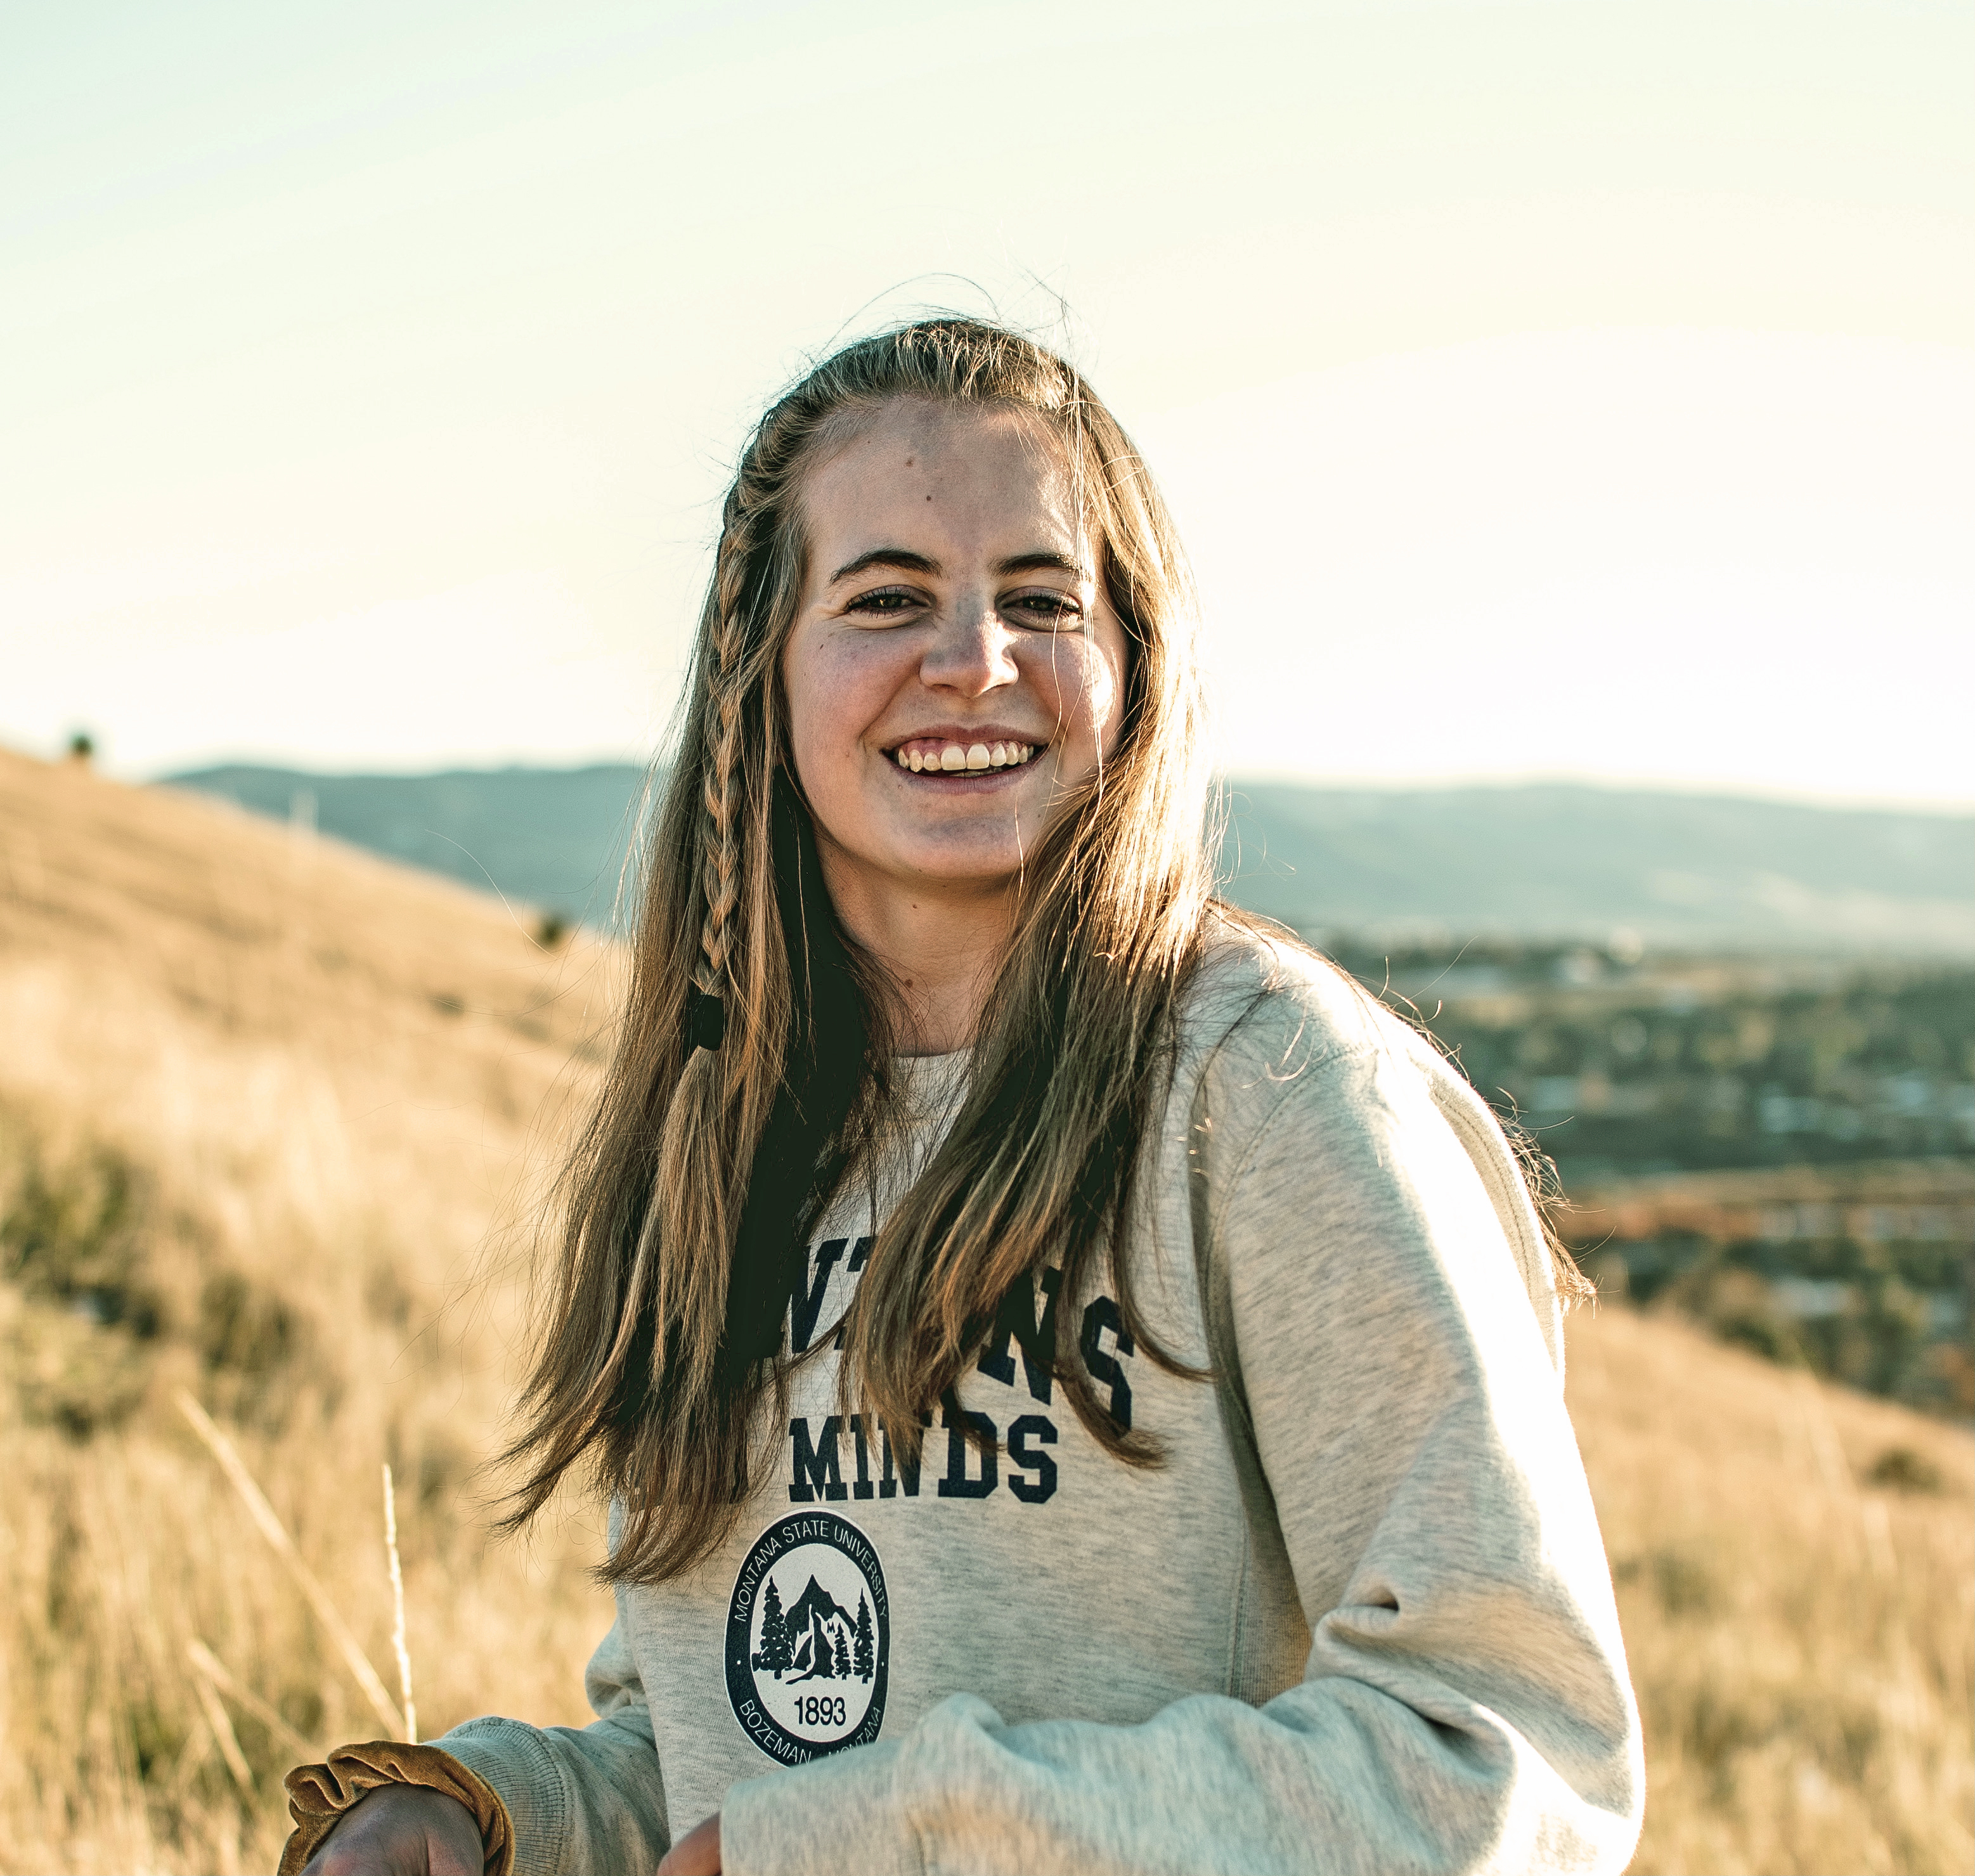 Image of Paige Schlegel smiling at the camera. In the background is a blurred hill. The grass is yellowing and a town is in the background.